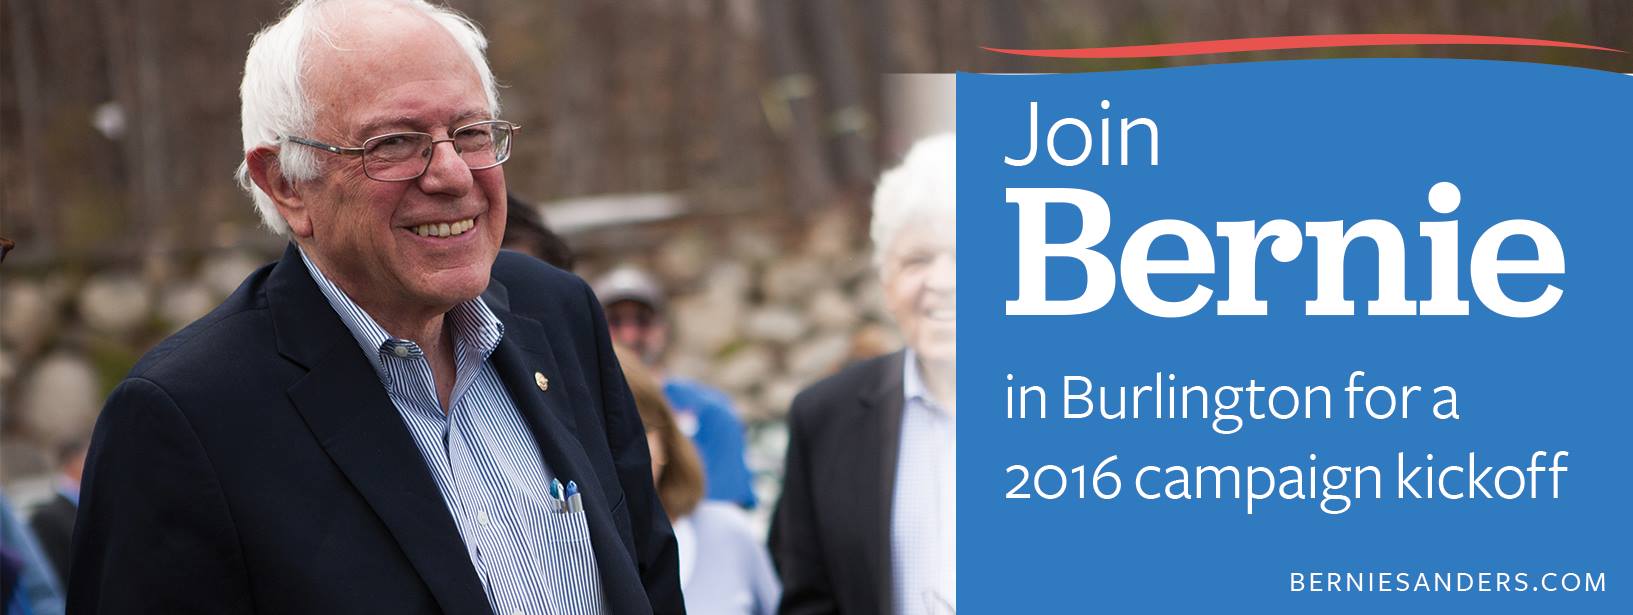 graphic for bernie sanders announcement in burlington, vt on may 26, 2015